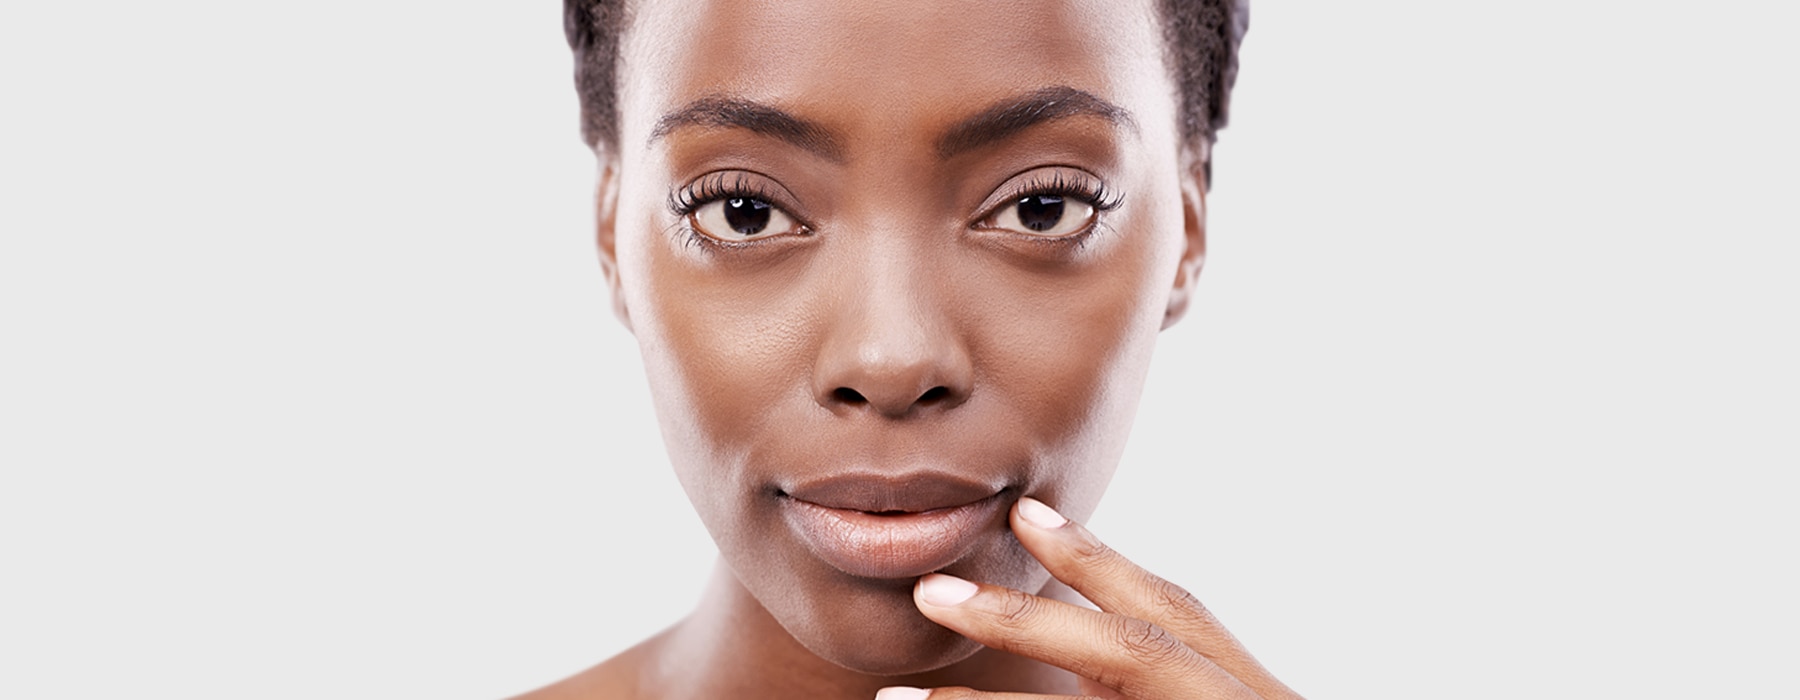 Make a habit of keeping skin beautiful, with the 3 R's